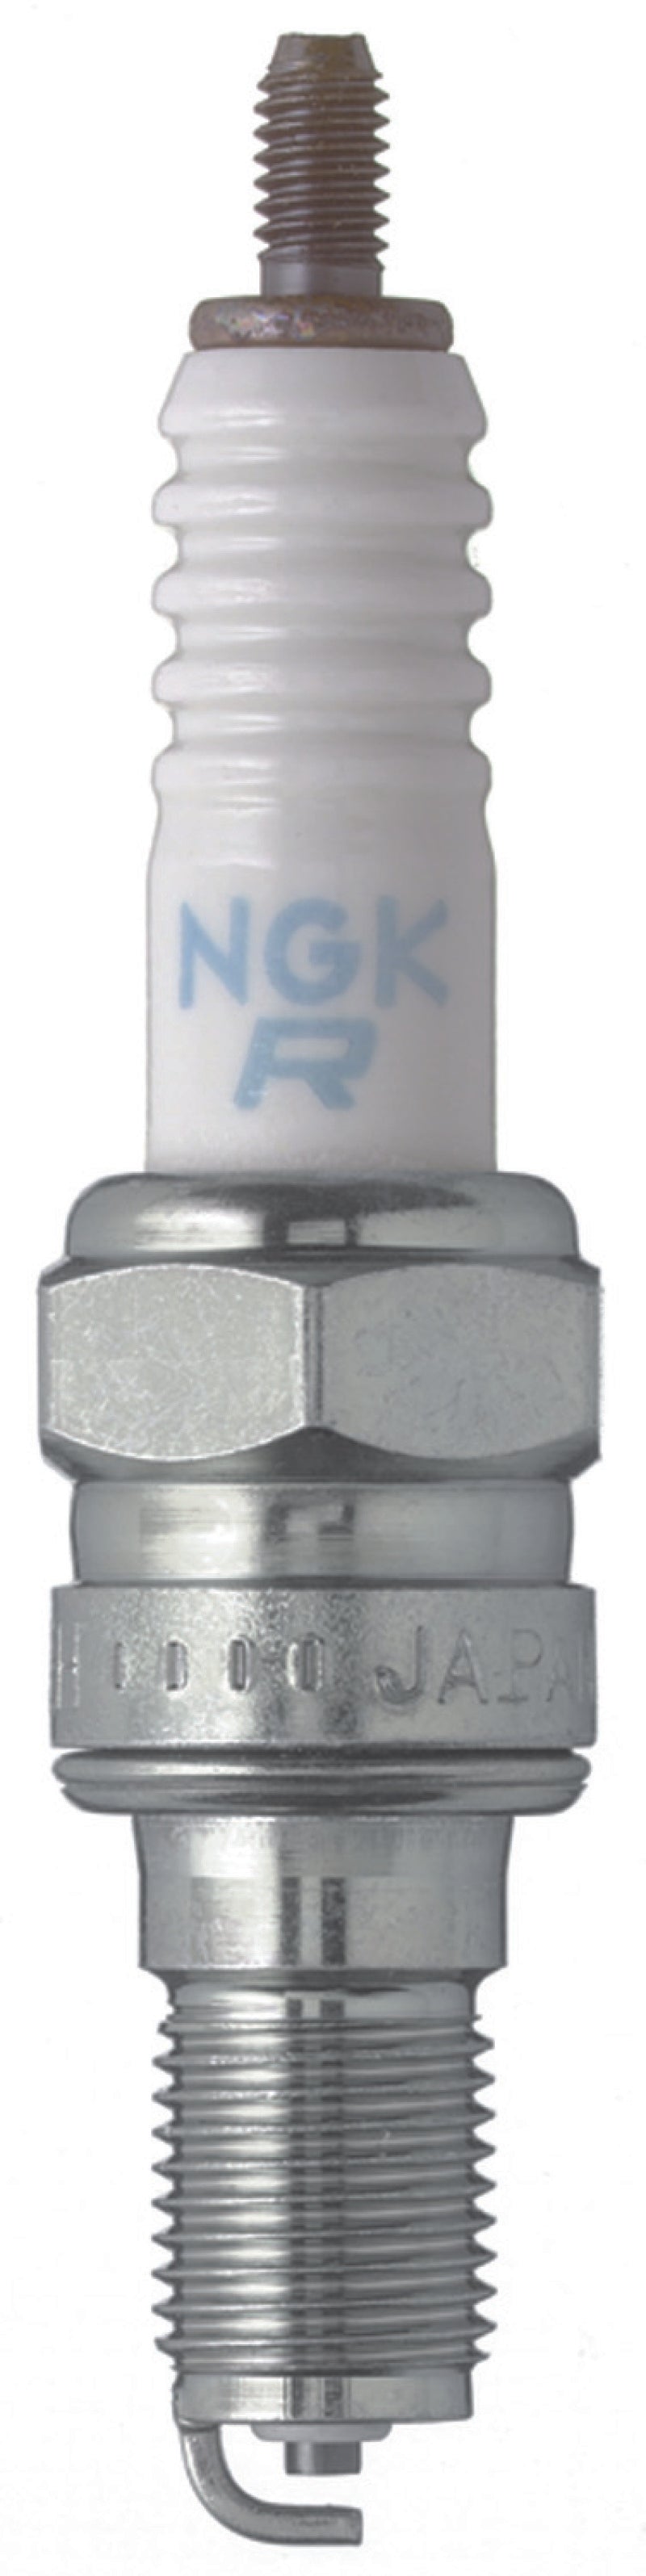 NGK Standard Spark Plug Box of 4 (CR8EH-9) -  Shop now at Performance Car Parts